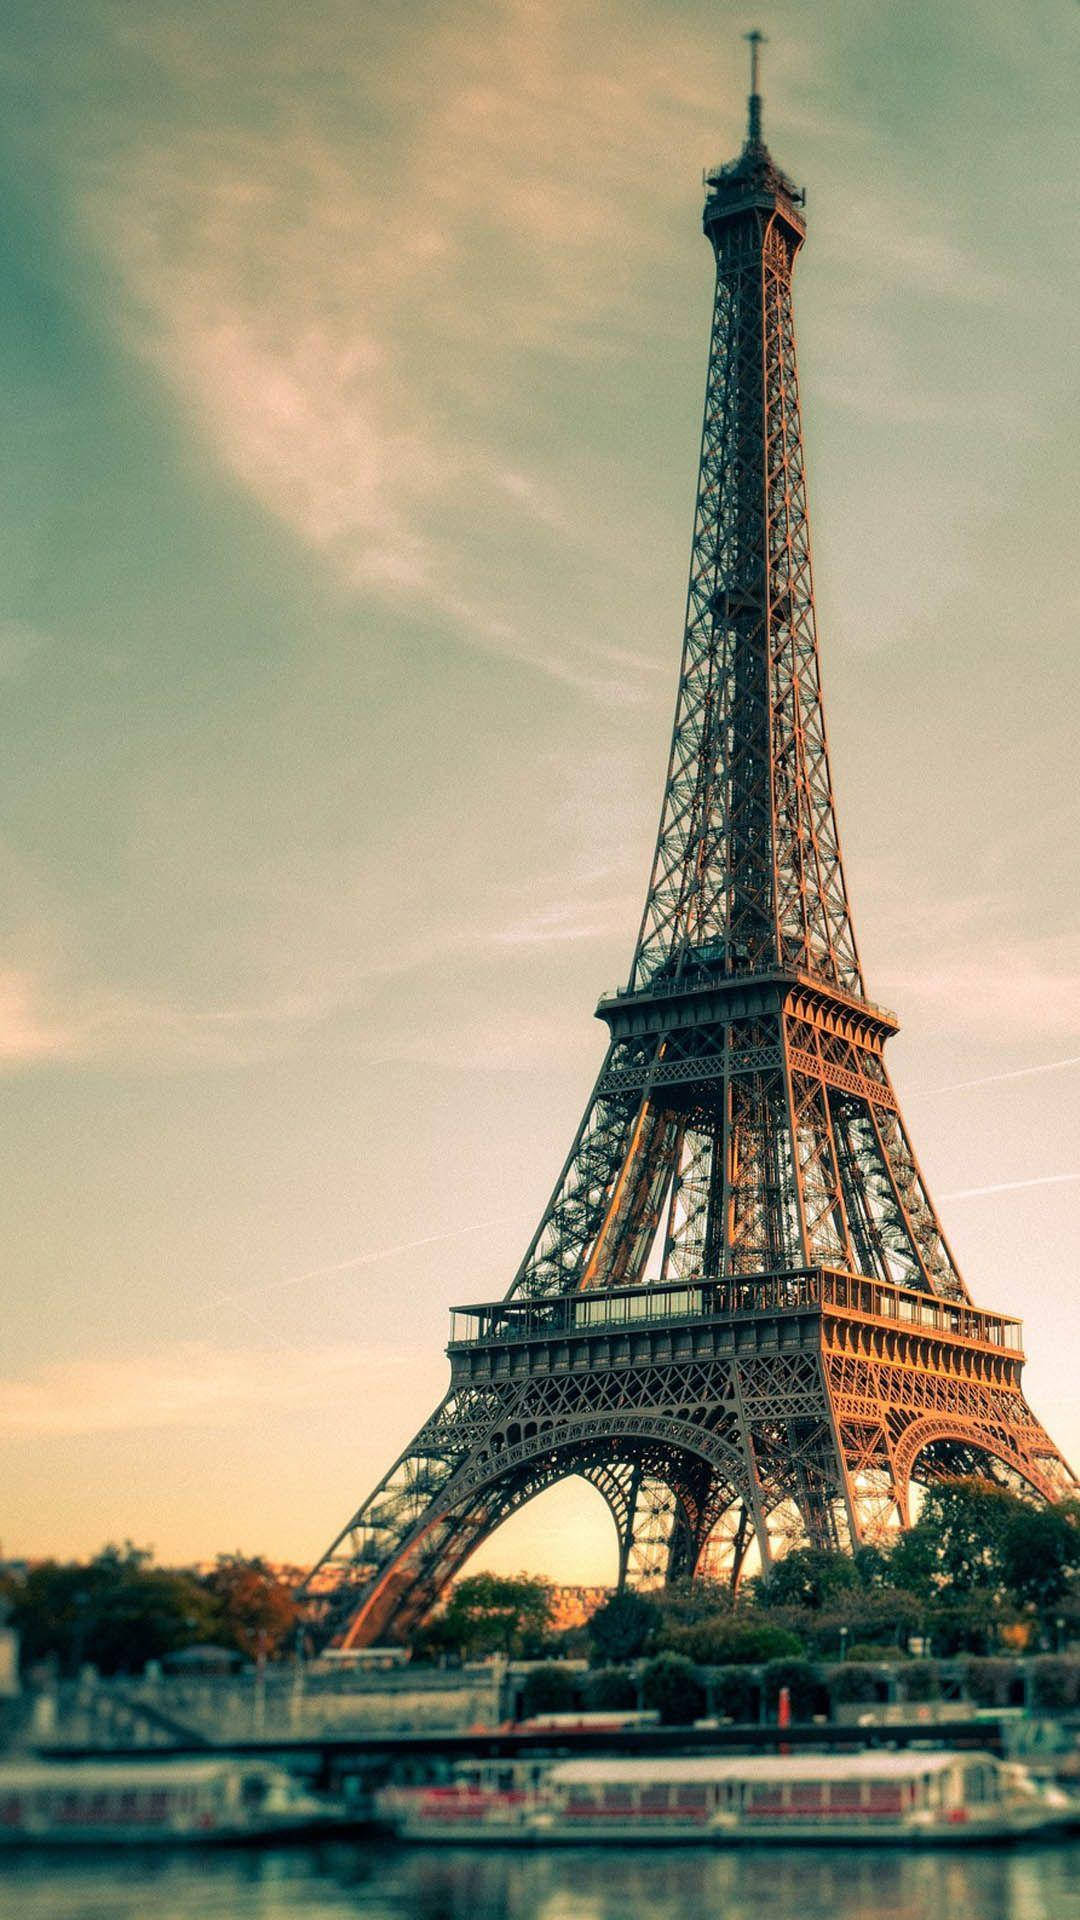 The Eiffel Tower stands tall against the skyline of Paris, a symbol of French history and culture. Wallpaper